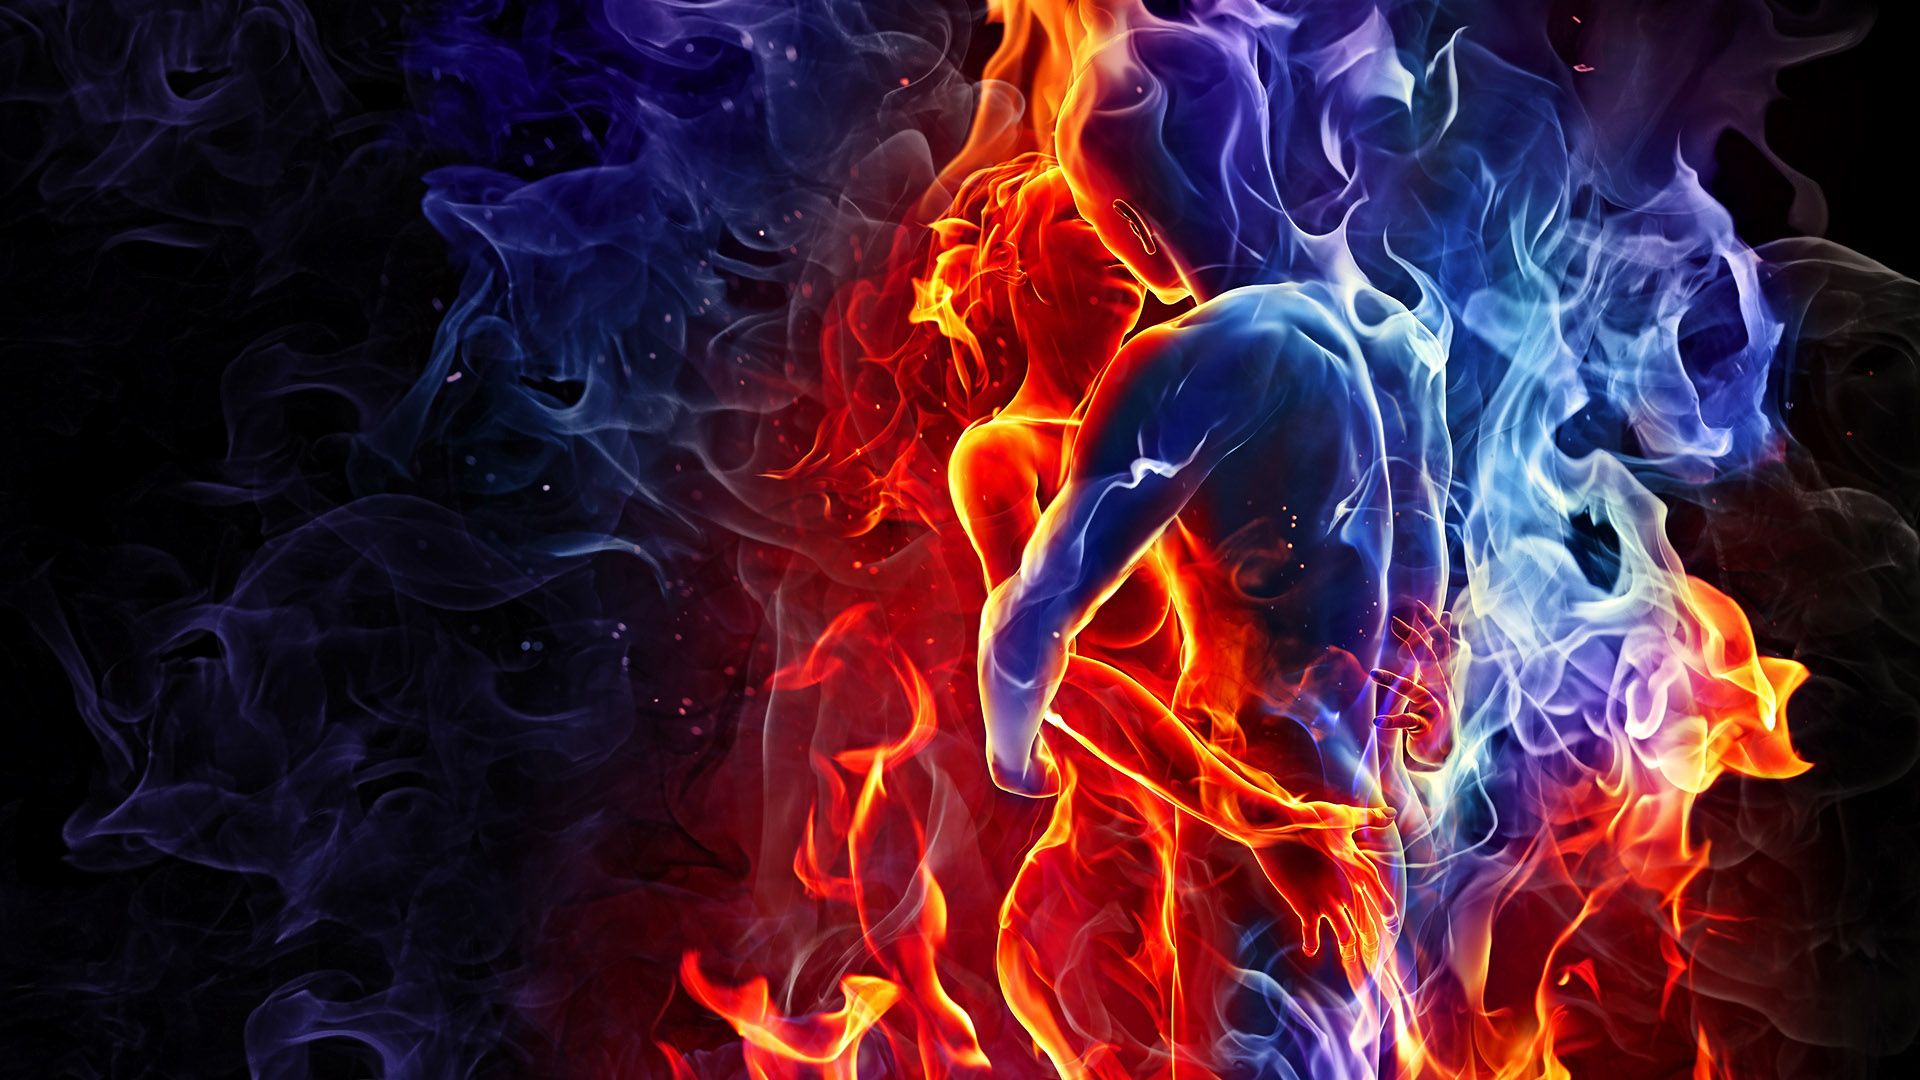 Fire and Ice Image, Fractal Fire And Ice Image